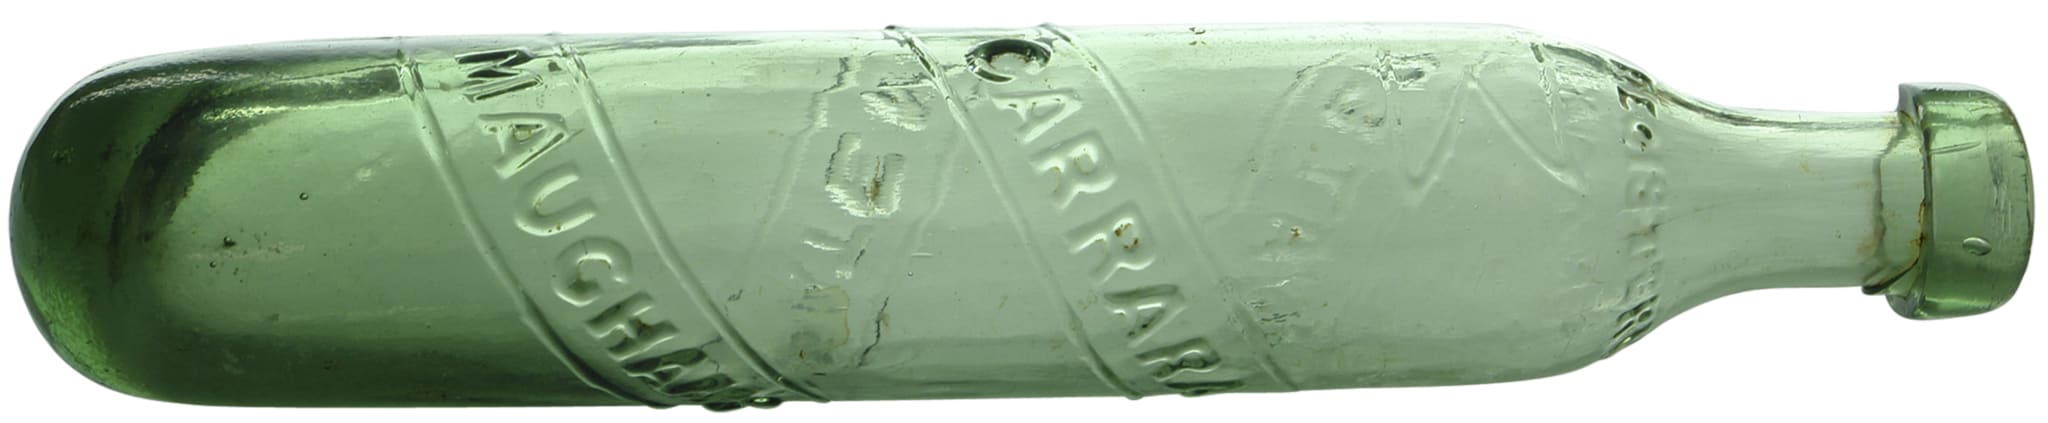 Maugham's Patent Carrara Water 1845 Bottle